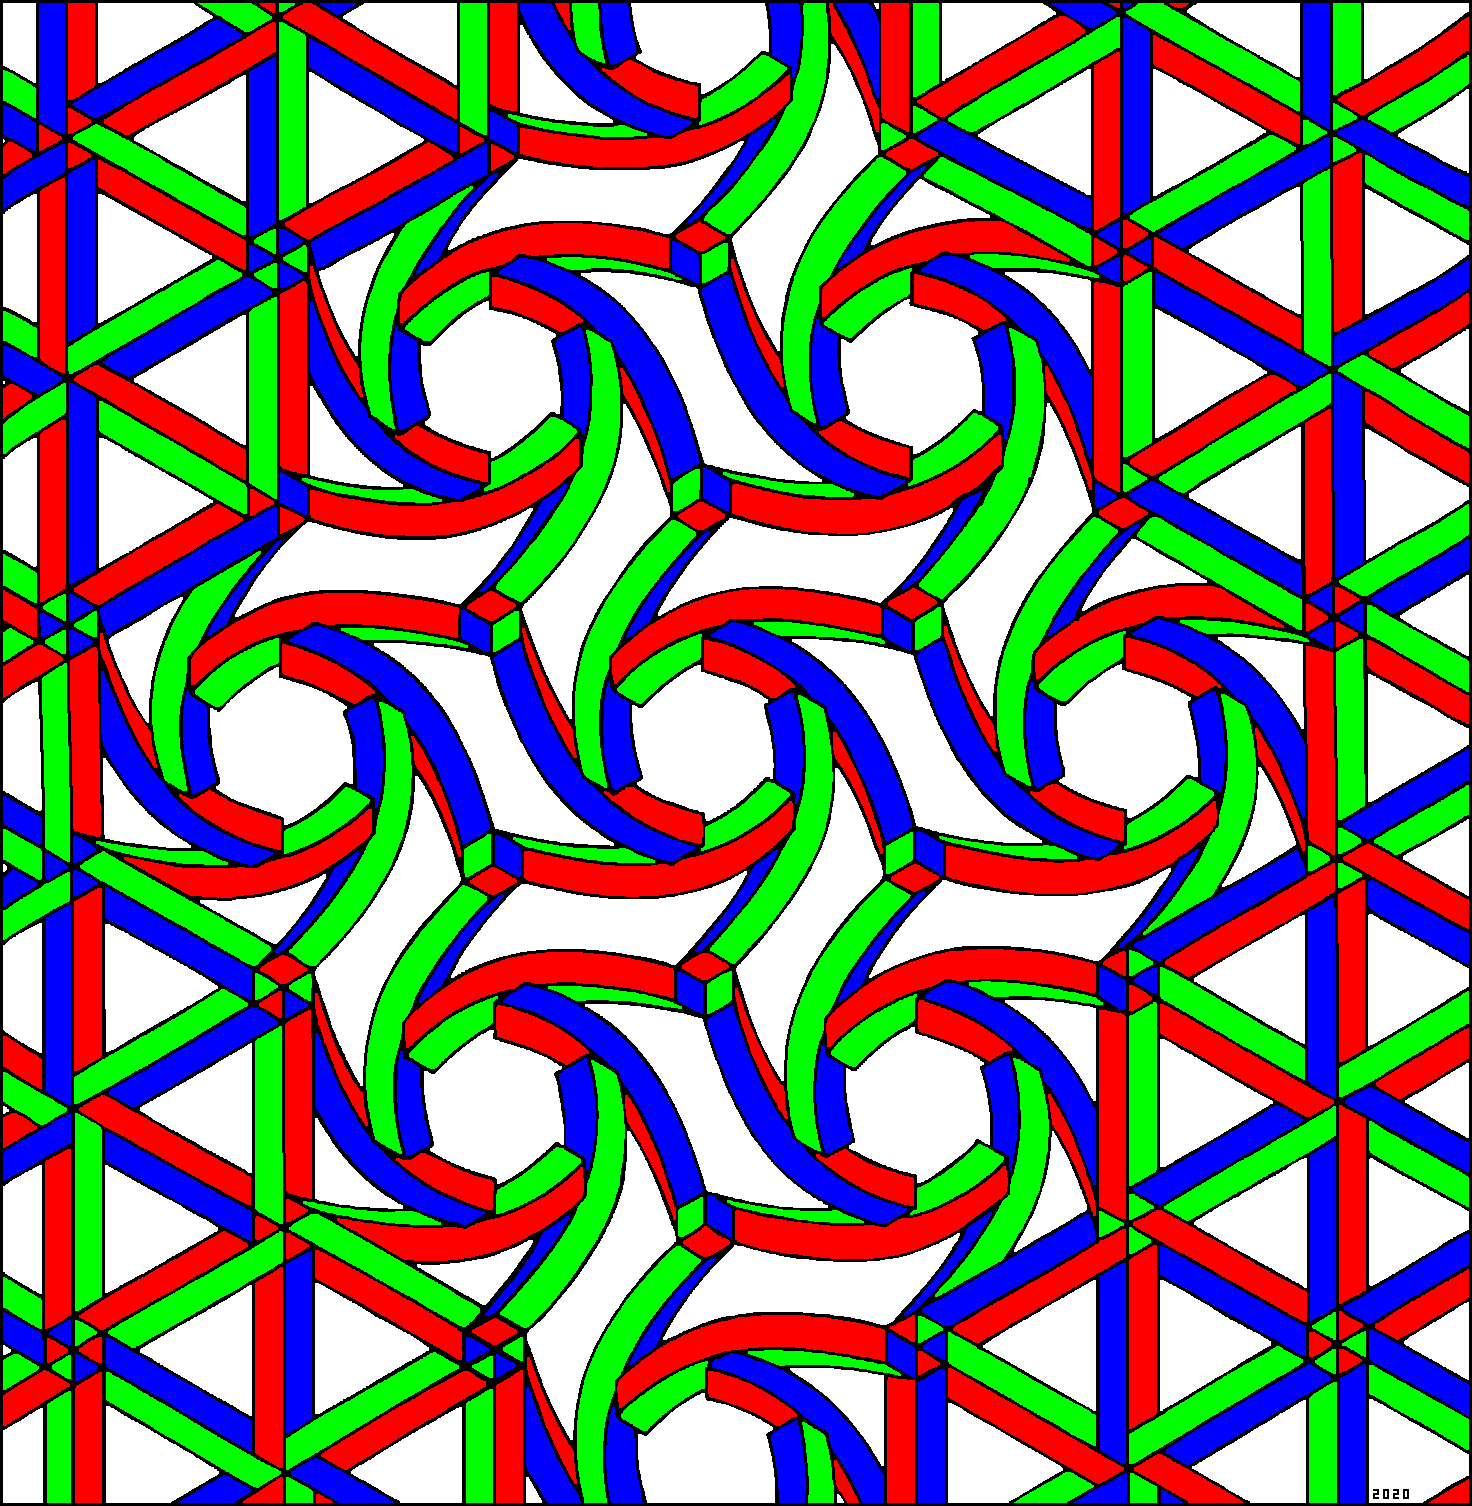 a graph-like structure, of angled boxes connected to cuboid nodes, coloured in red, green, and blue.